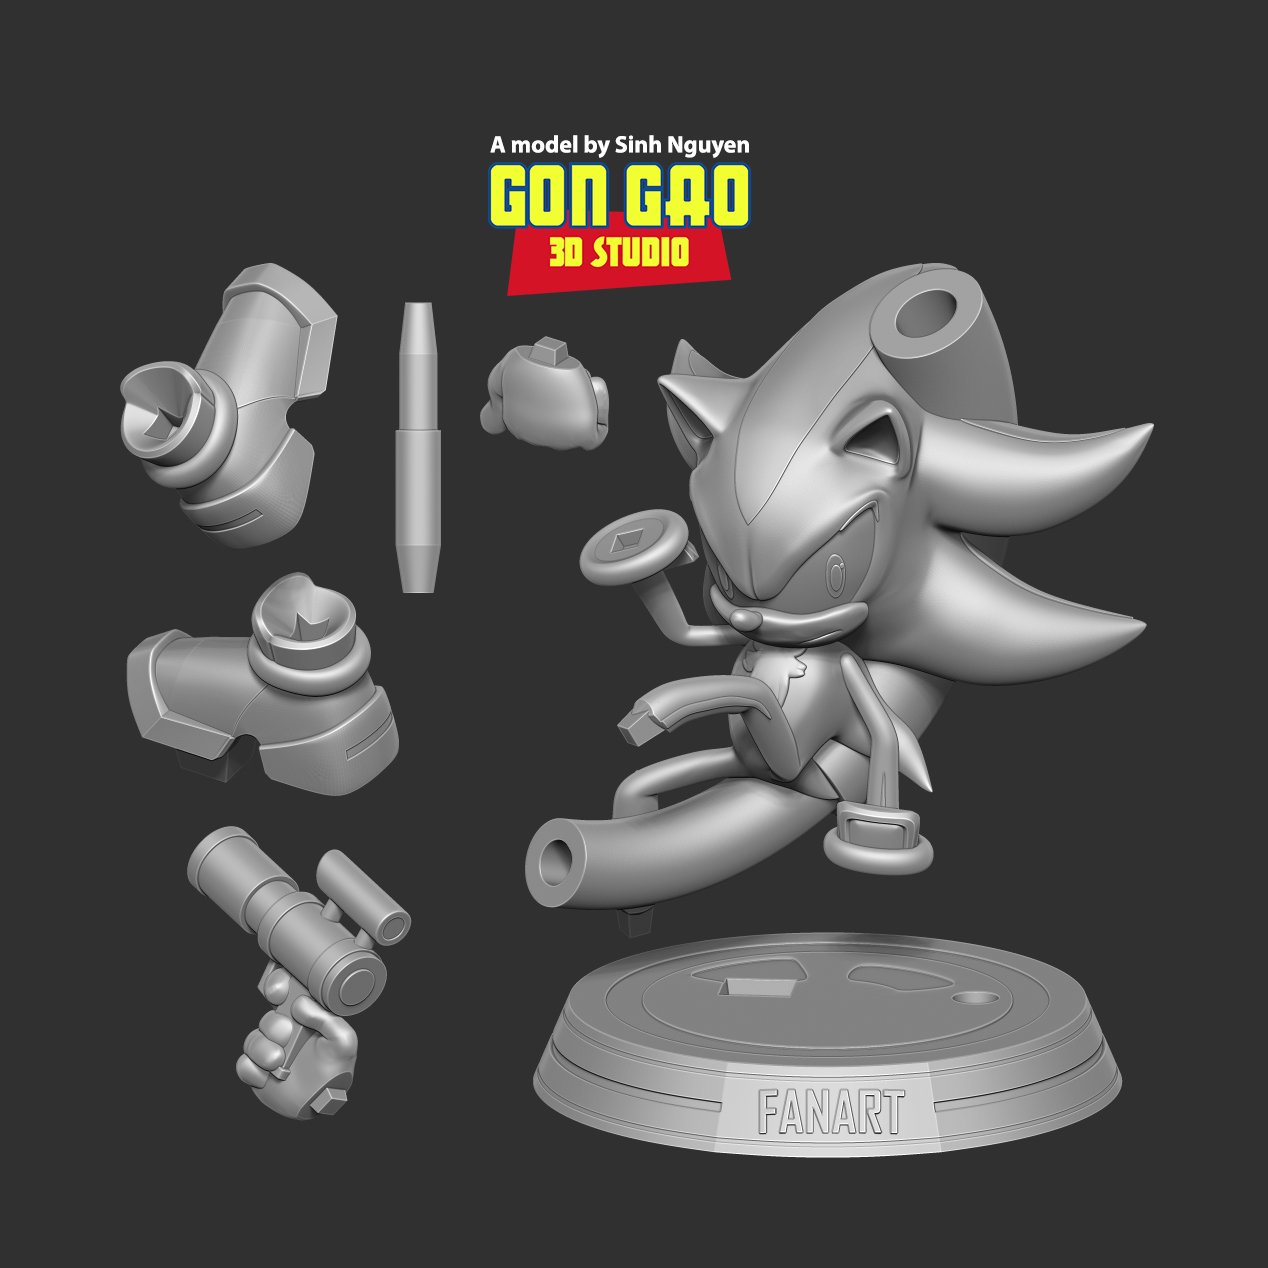 Shadow (Sonic the Hedgehog) by Solenoid, Download free STL model